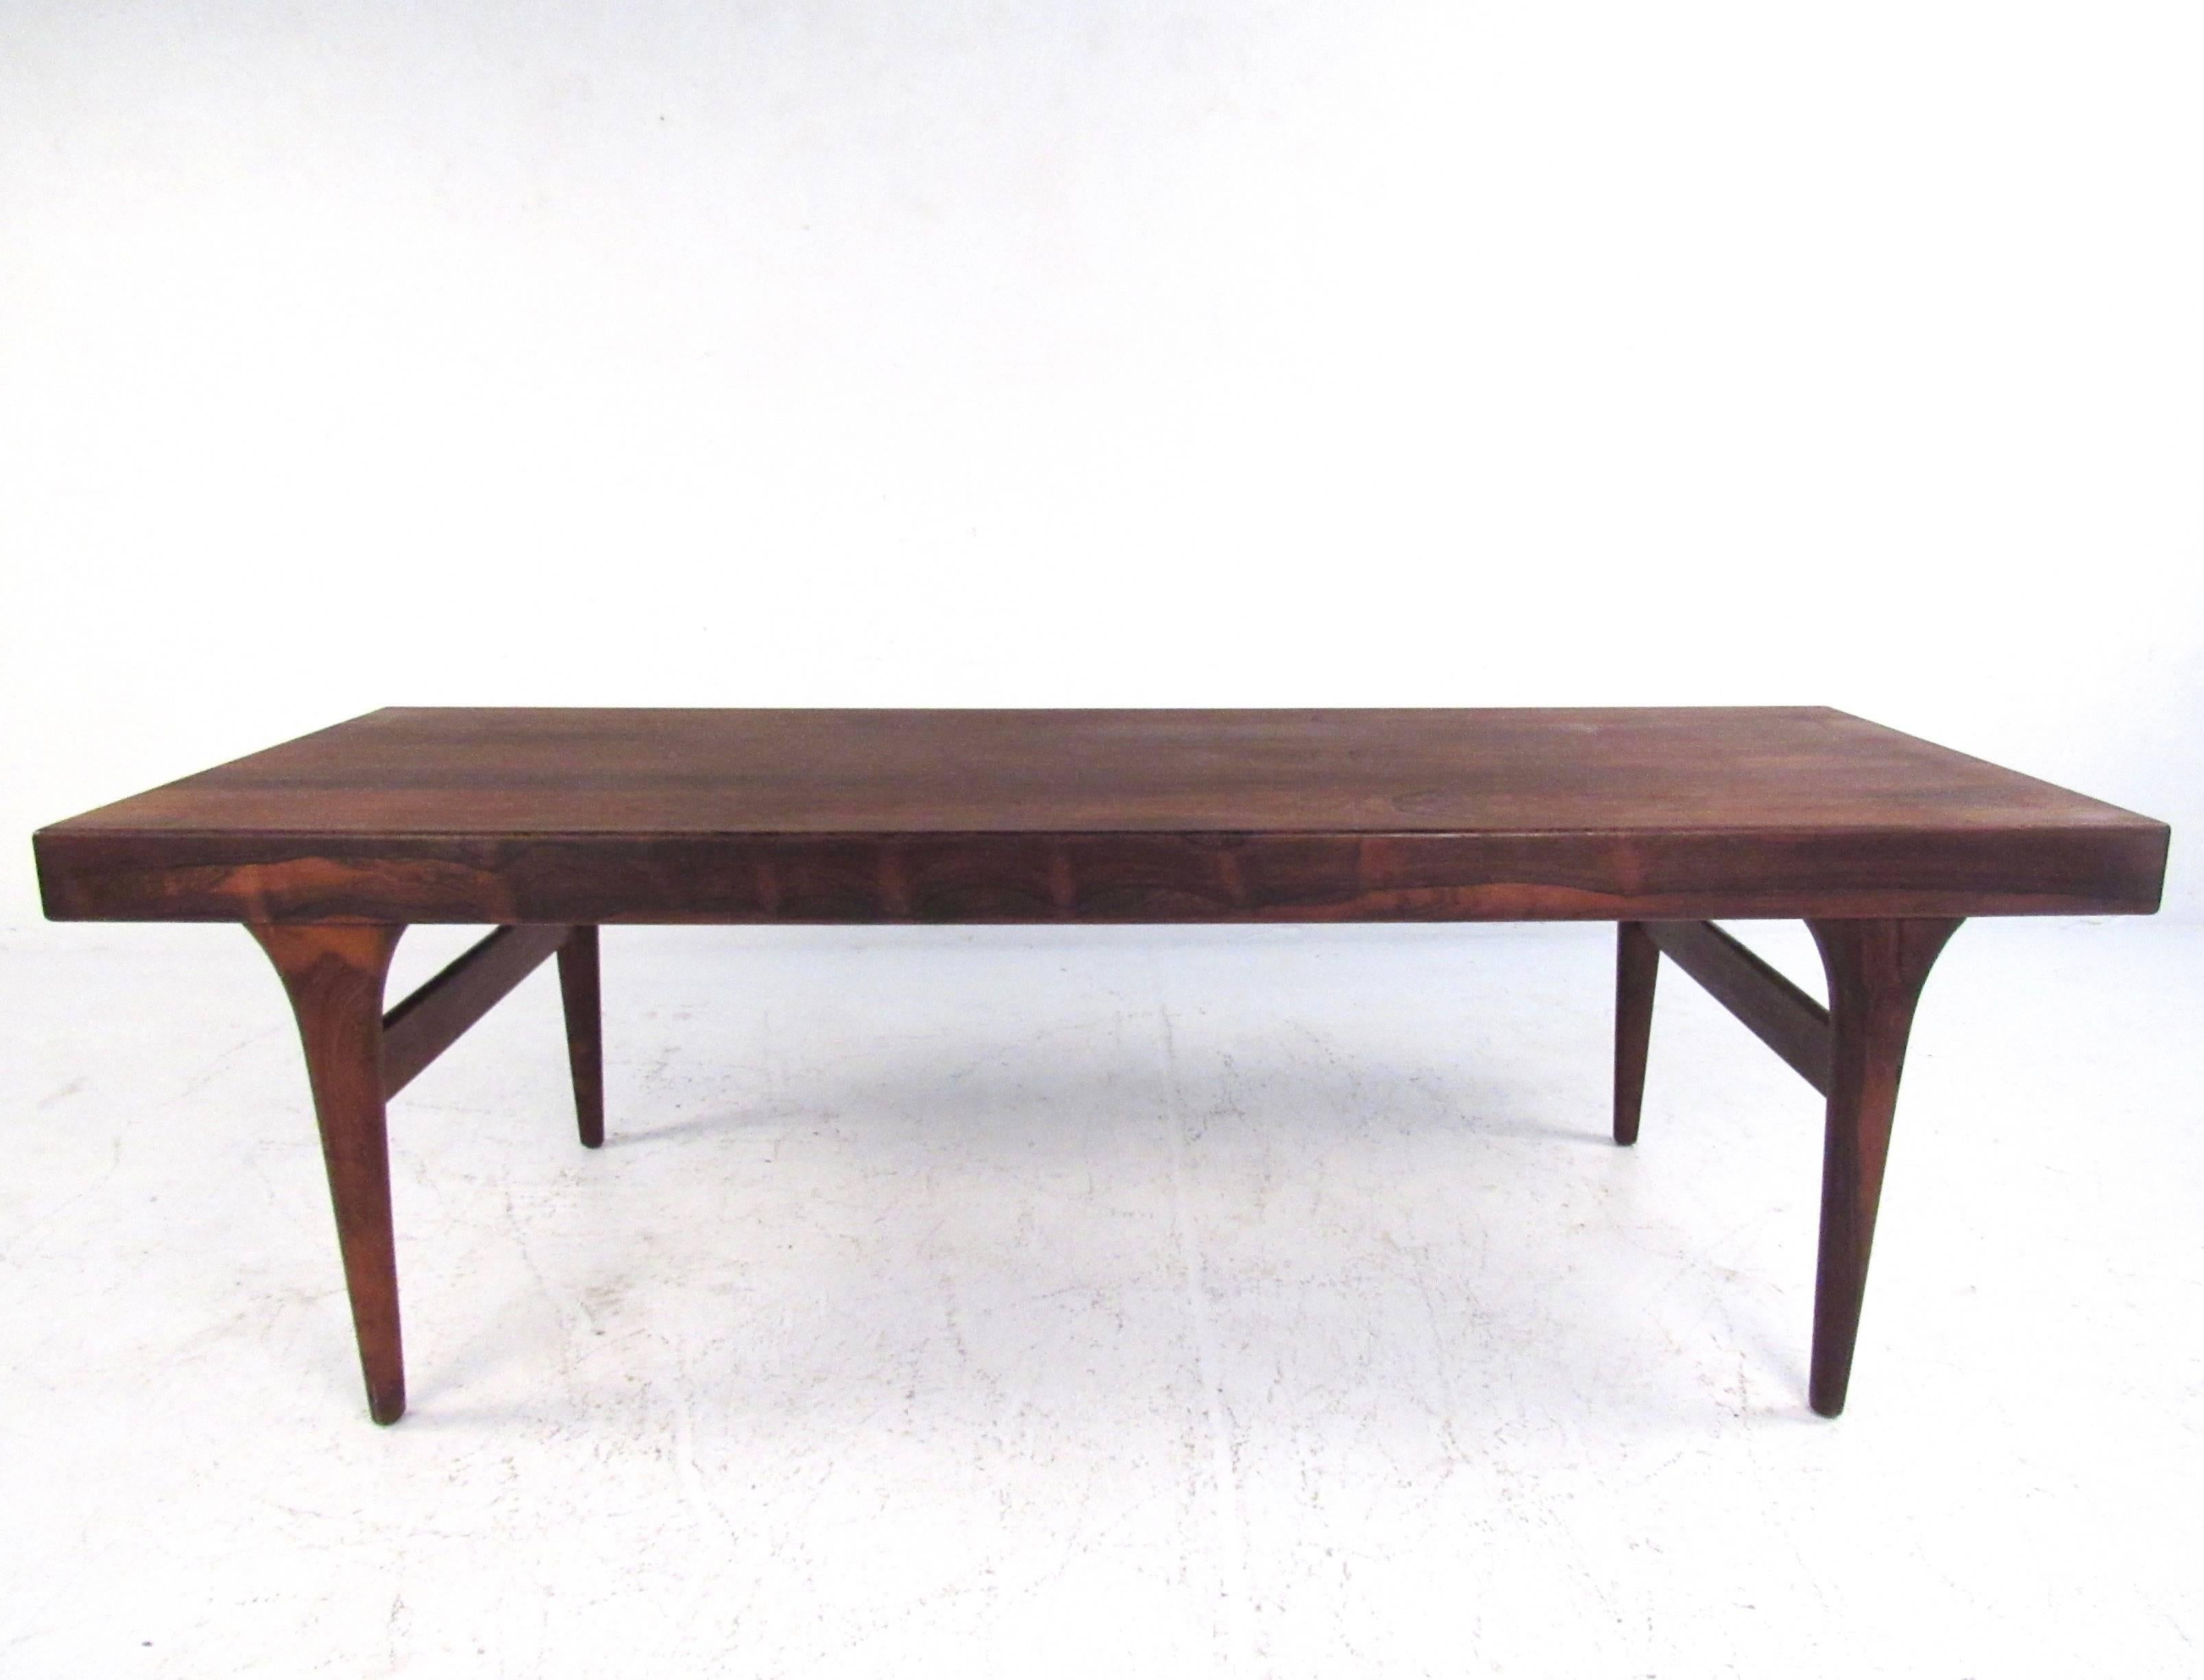 This stunning vintage rosewood coffee table features the unique Mid-Century Modern design of Johannes Andersen. Beautiful rosewood finish is showcased with stylish modern lines, tapered legs, and stretchers for extra support. Each end of the table